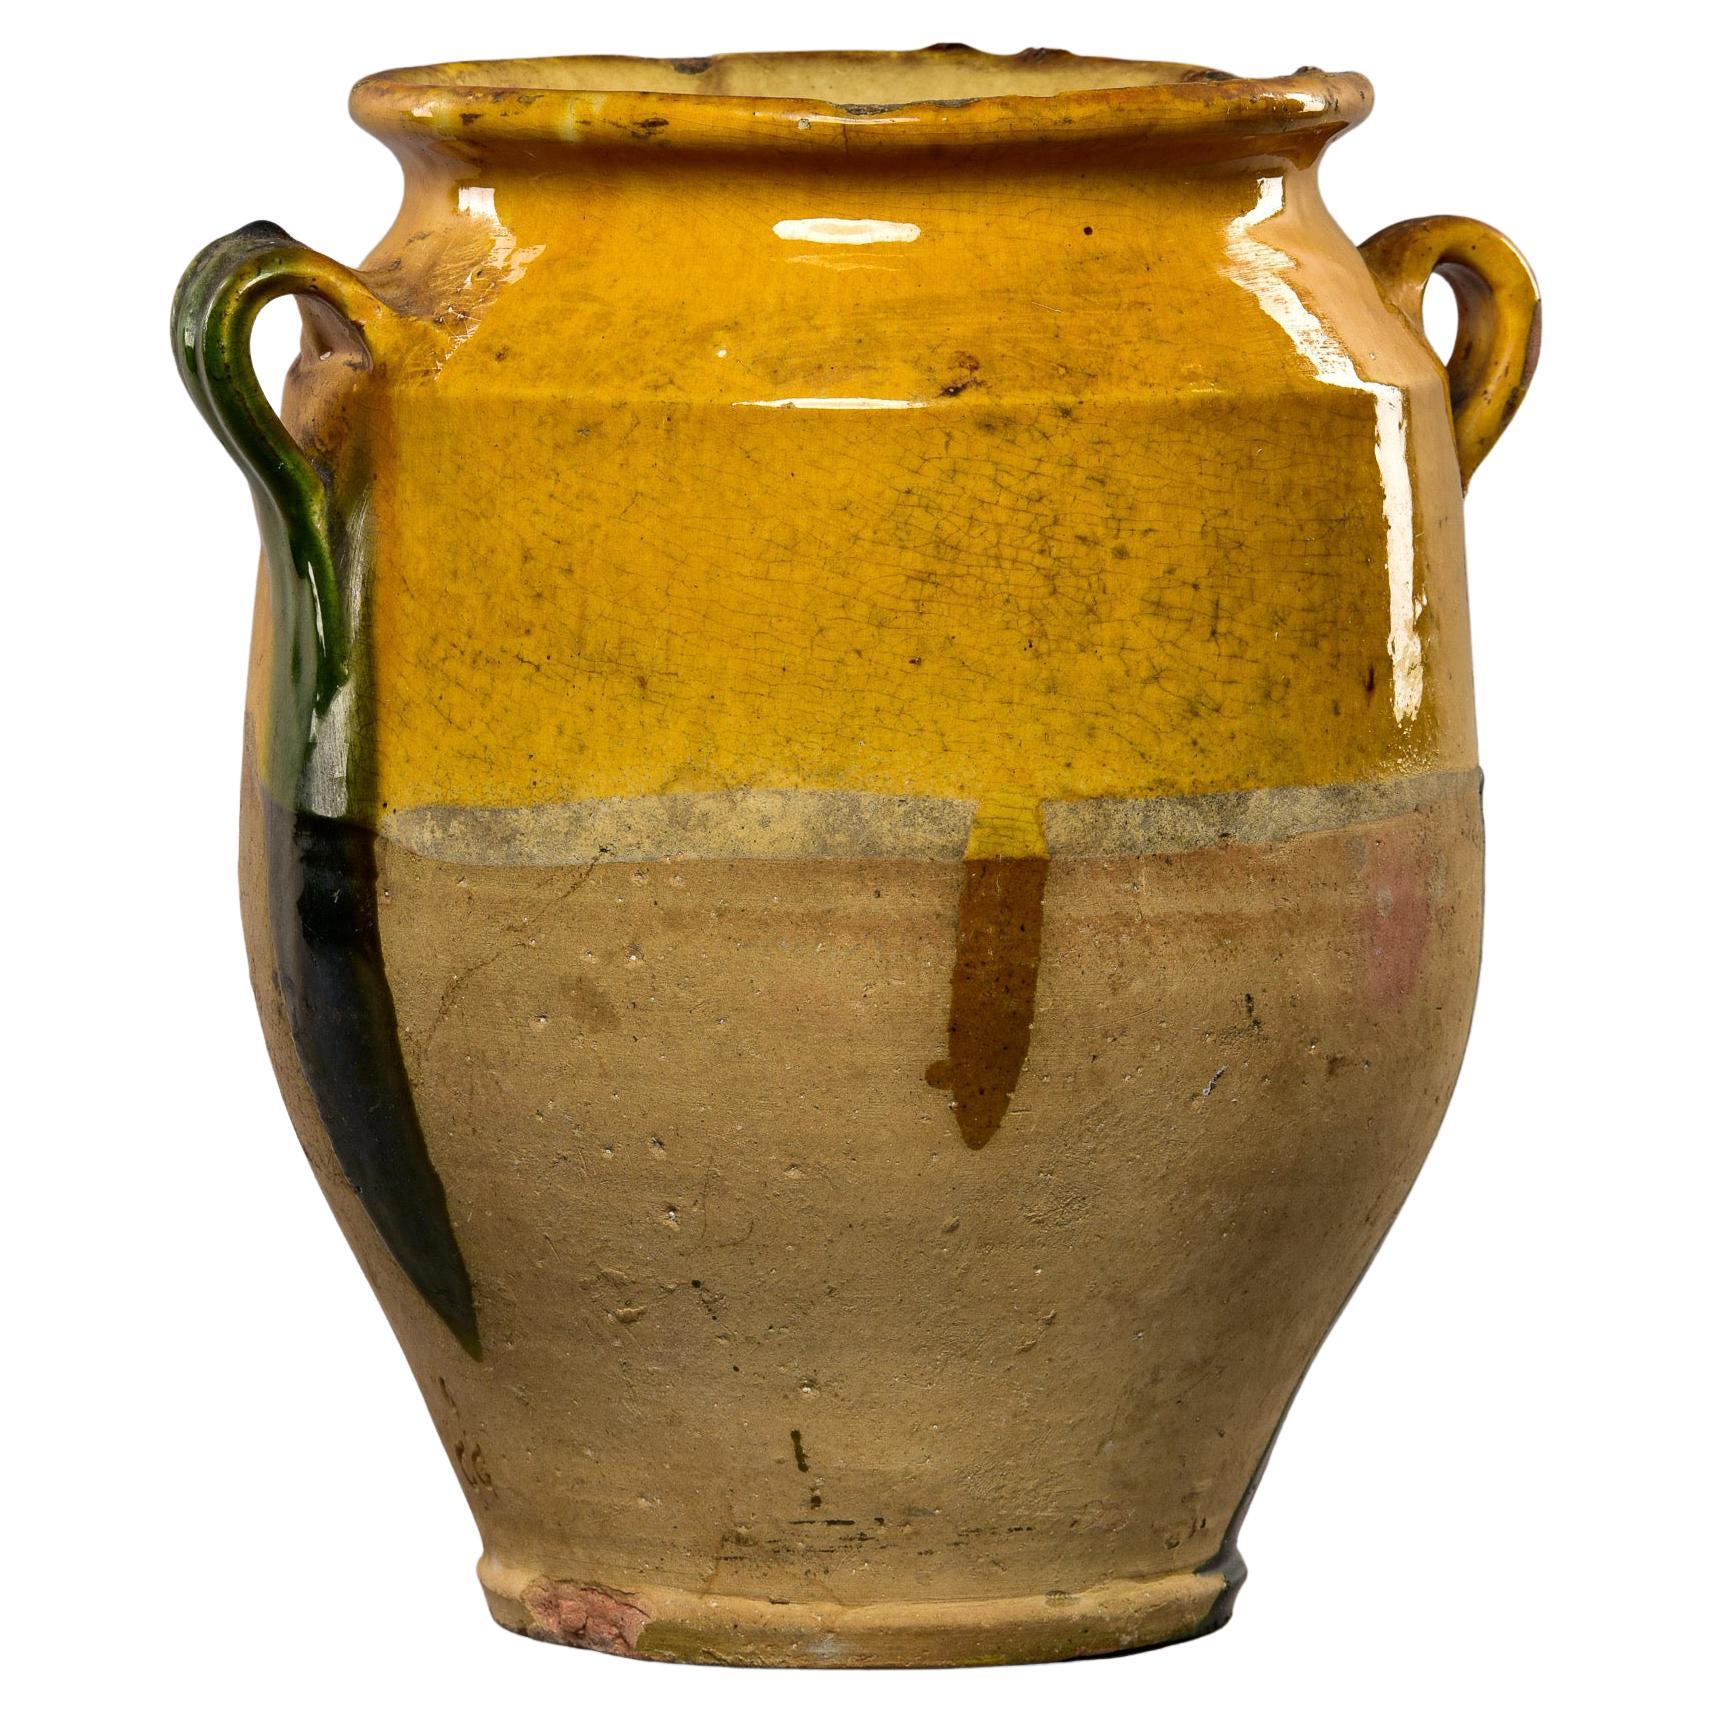 Early 20th C Medium Size Confit Jar with Green Handle